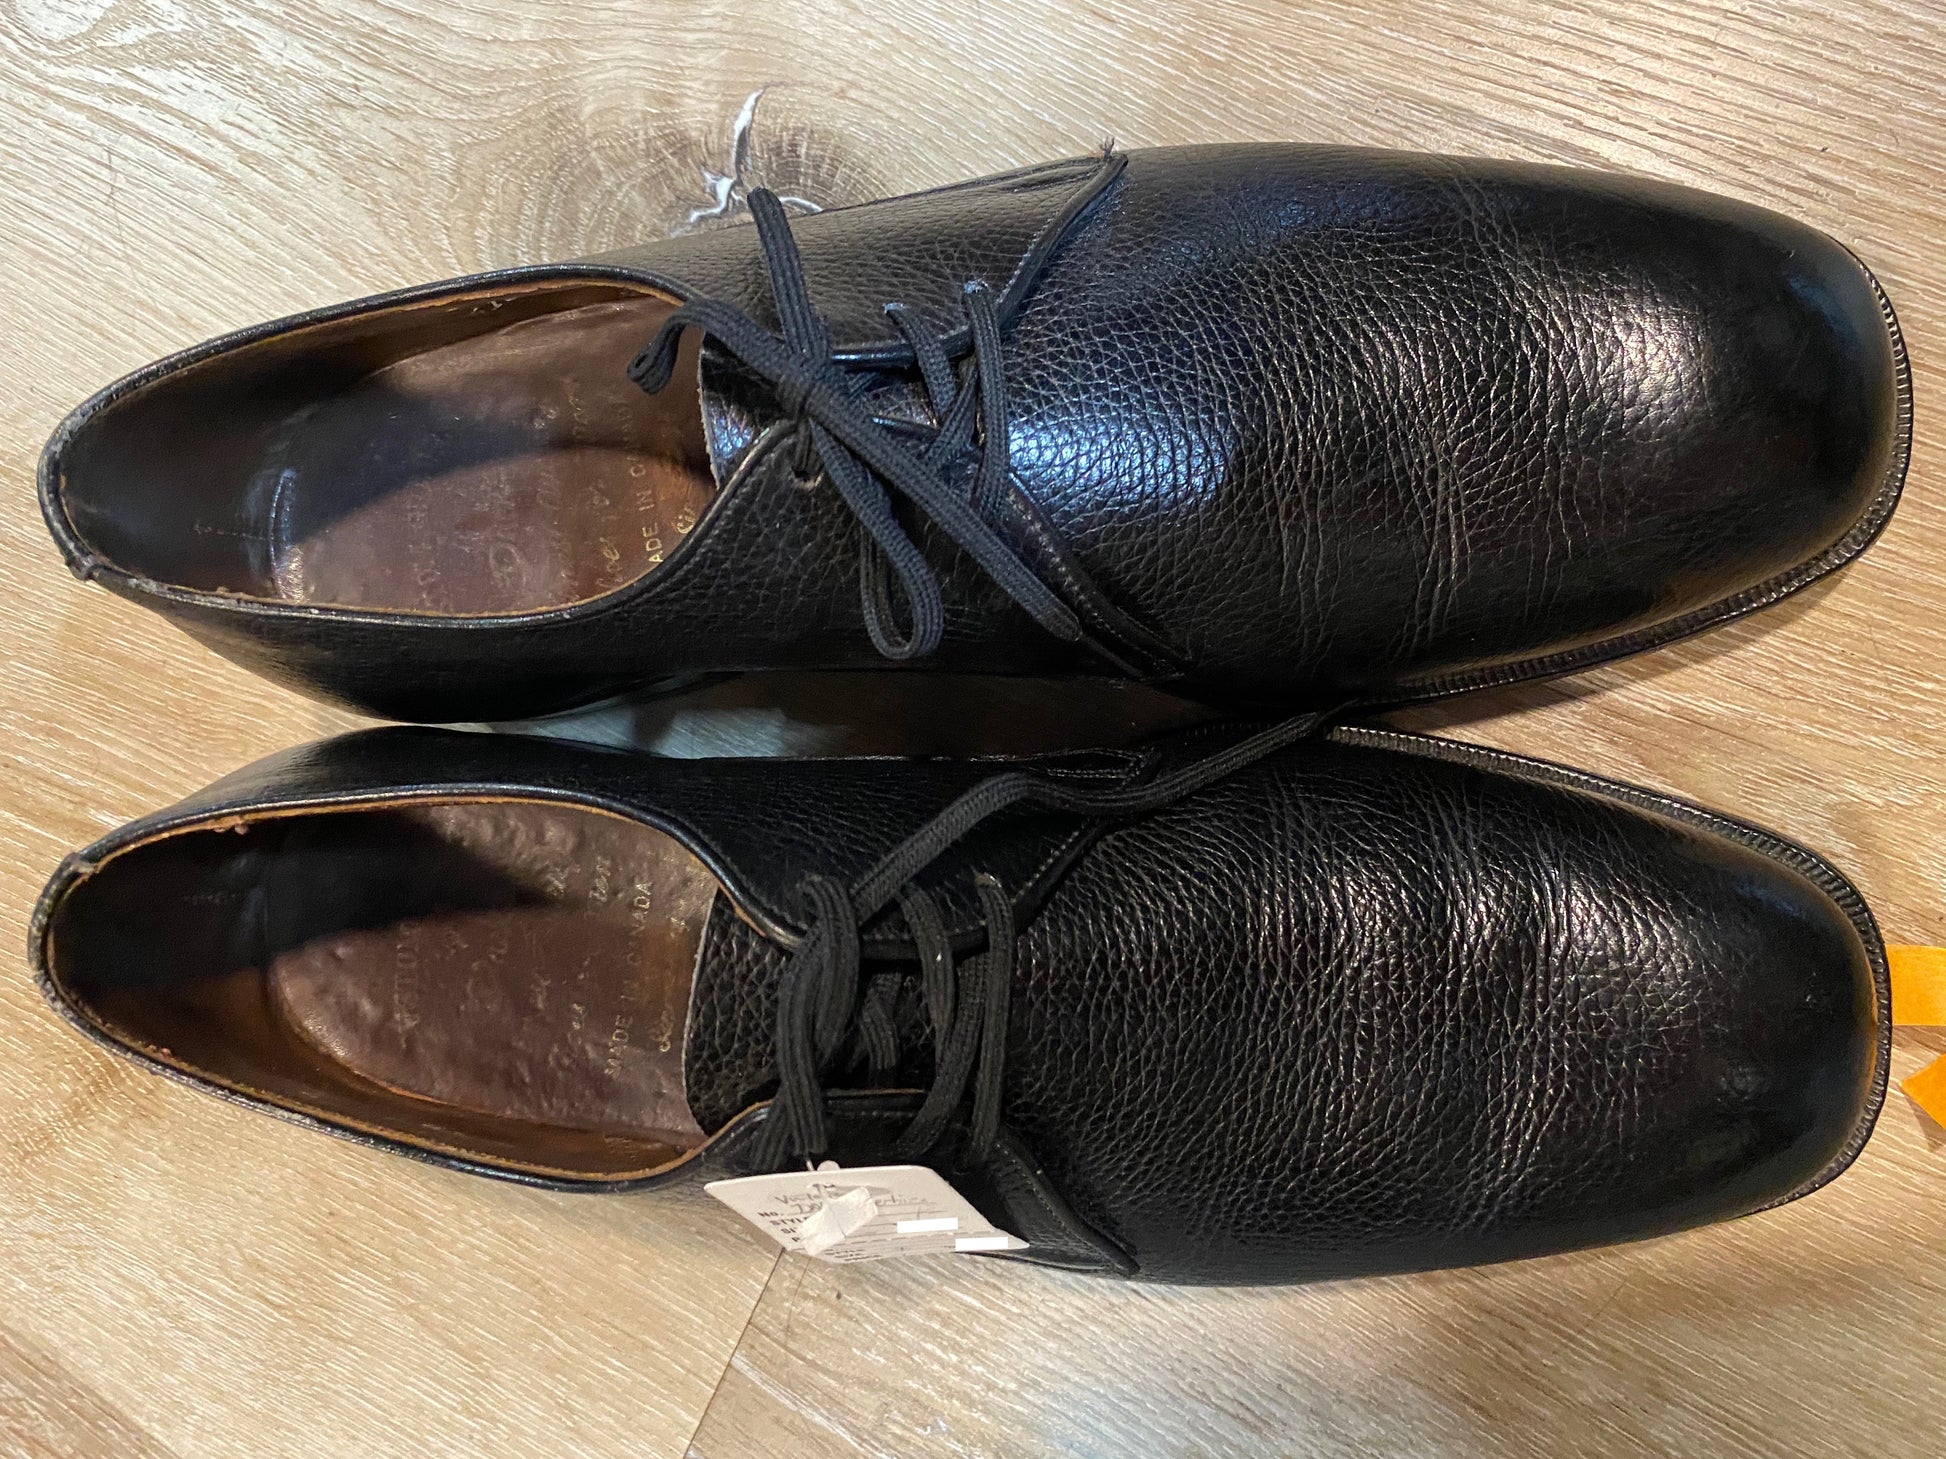 Kingspier Vintage - Black Plain Toe Derby Shoes by Dack's Finest Quality Shoes for Men, Sizes: 7M 8.5W 39-40EURO, Made in Canada, Custom Grade by Dacks, Dack's Leather Soles and Rubber Heels